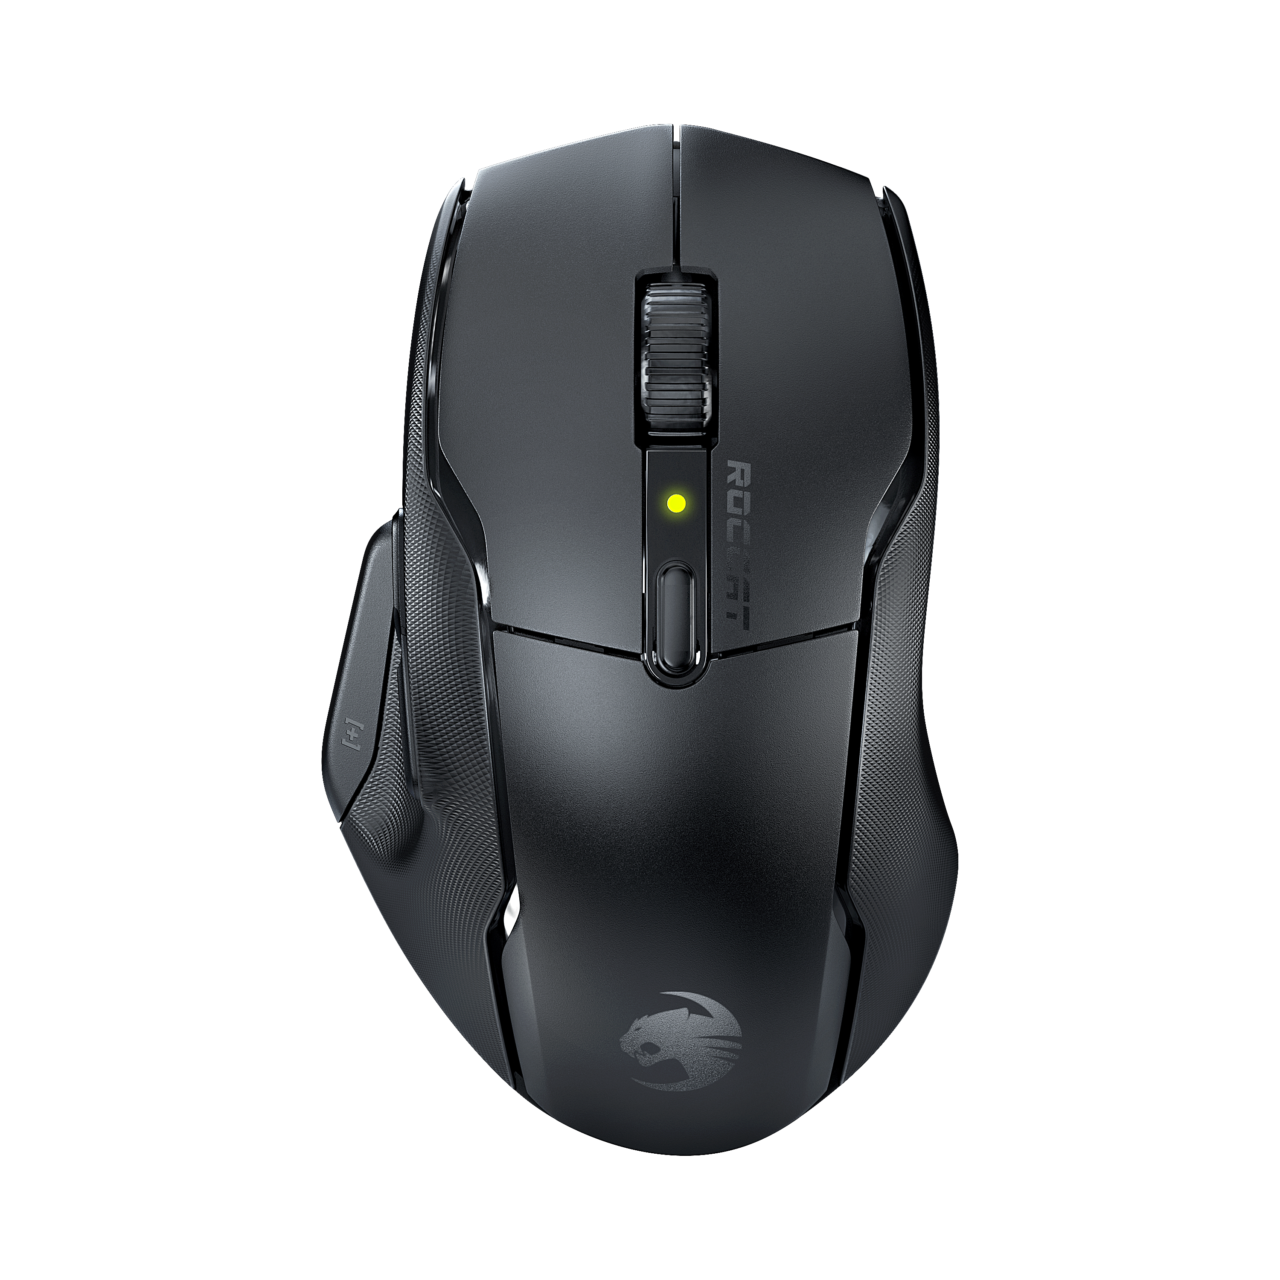 Kone Air Wireless PC Gaming Mouse product image (ROCCAT/Turtle Beach)